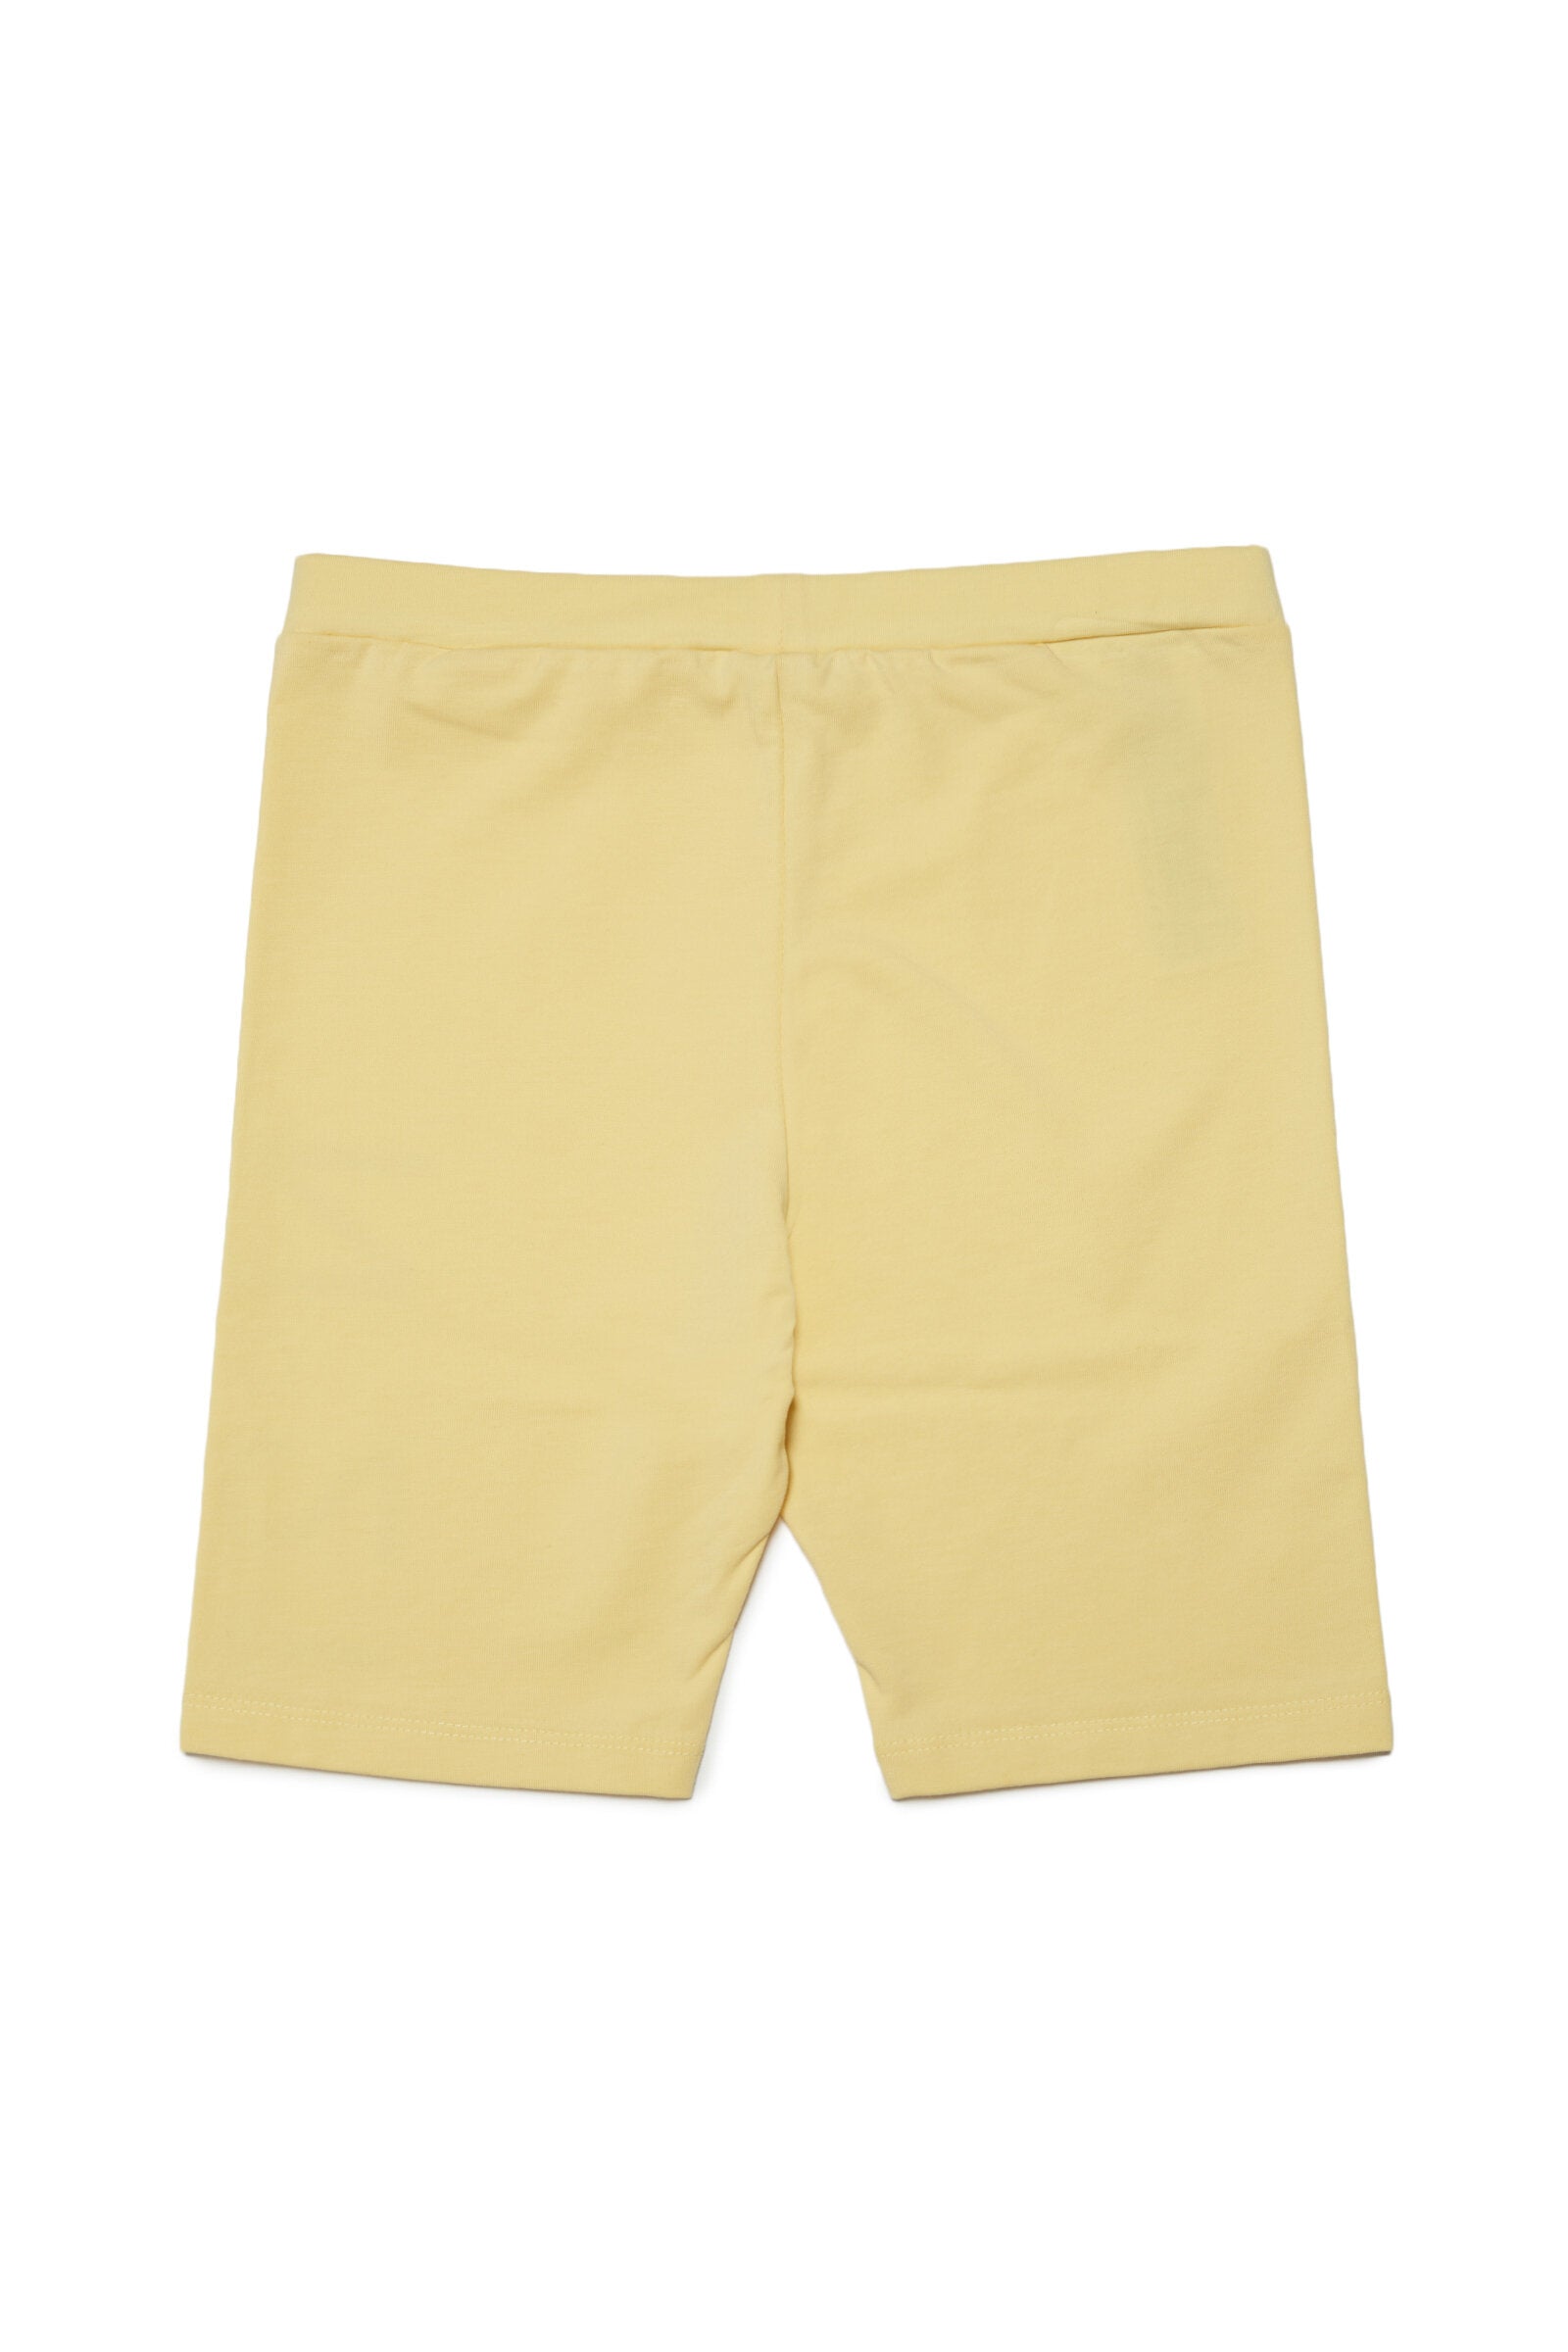 Yellow stretch jersey shorts cycling model with logo